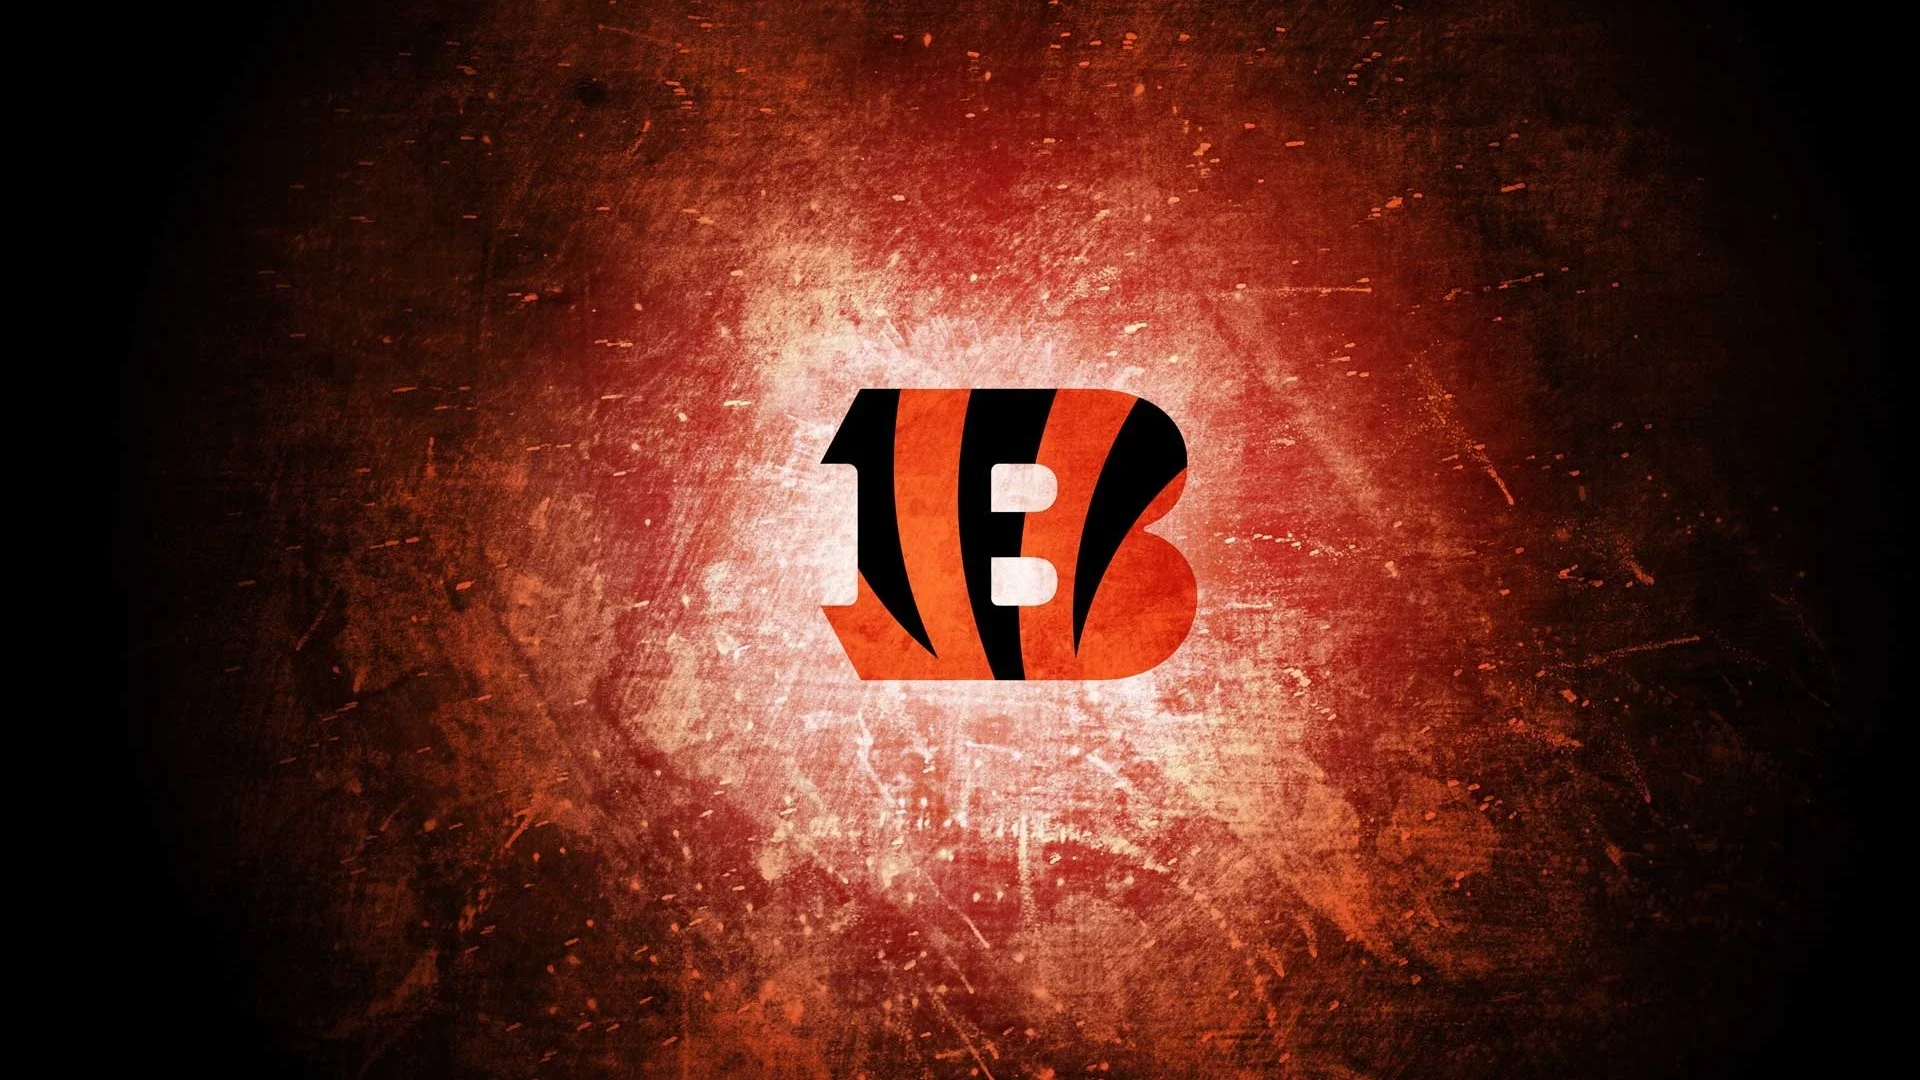 free images bengals logo wallpapers download high definiton wallpapers  windows 10 backgrounds 4k download wallpapers computer